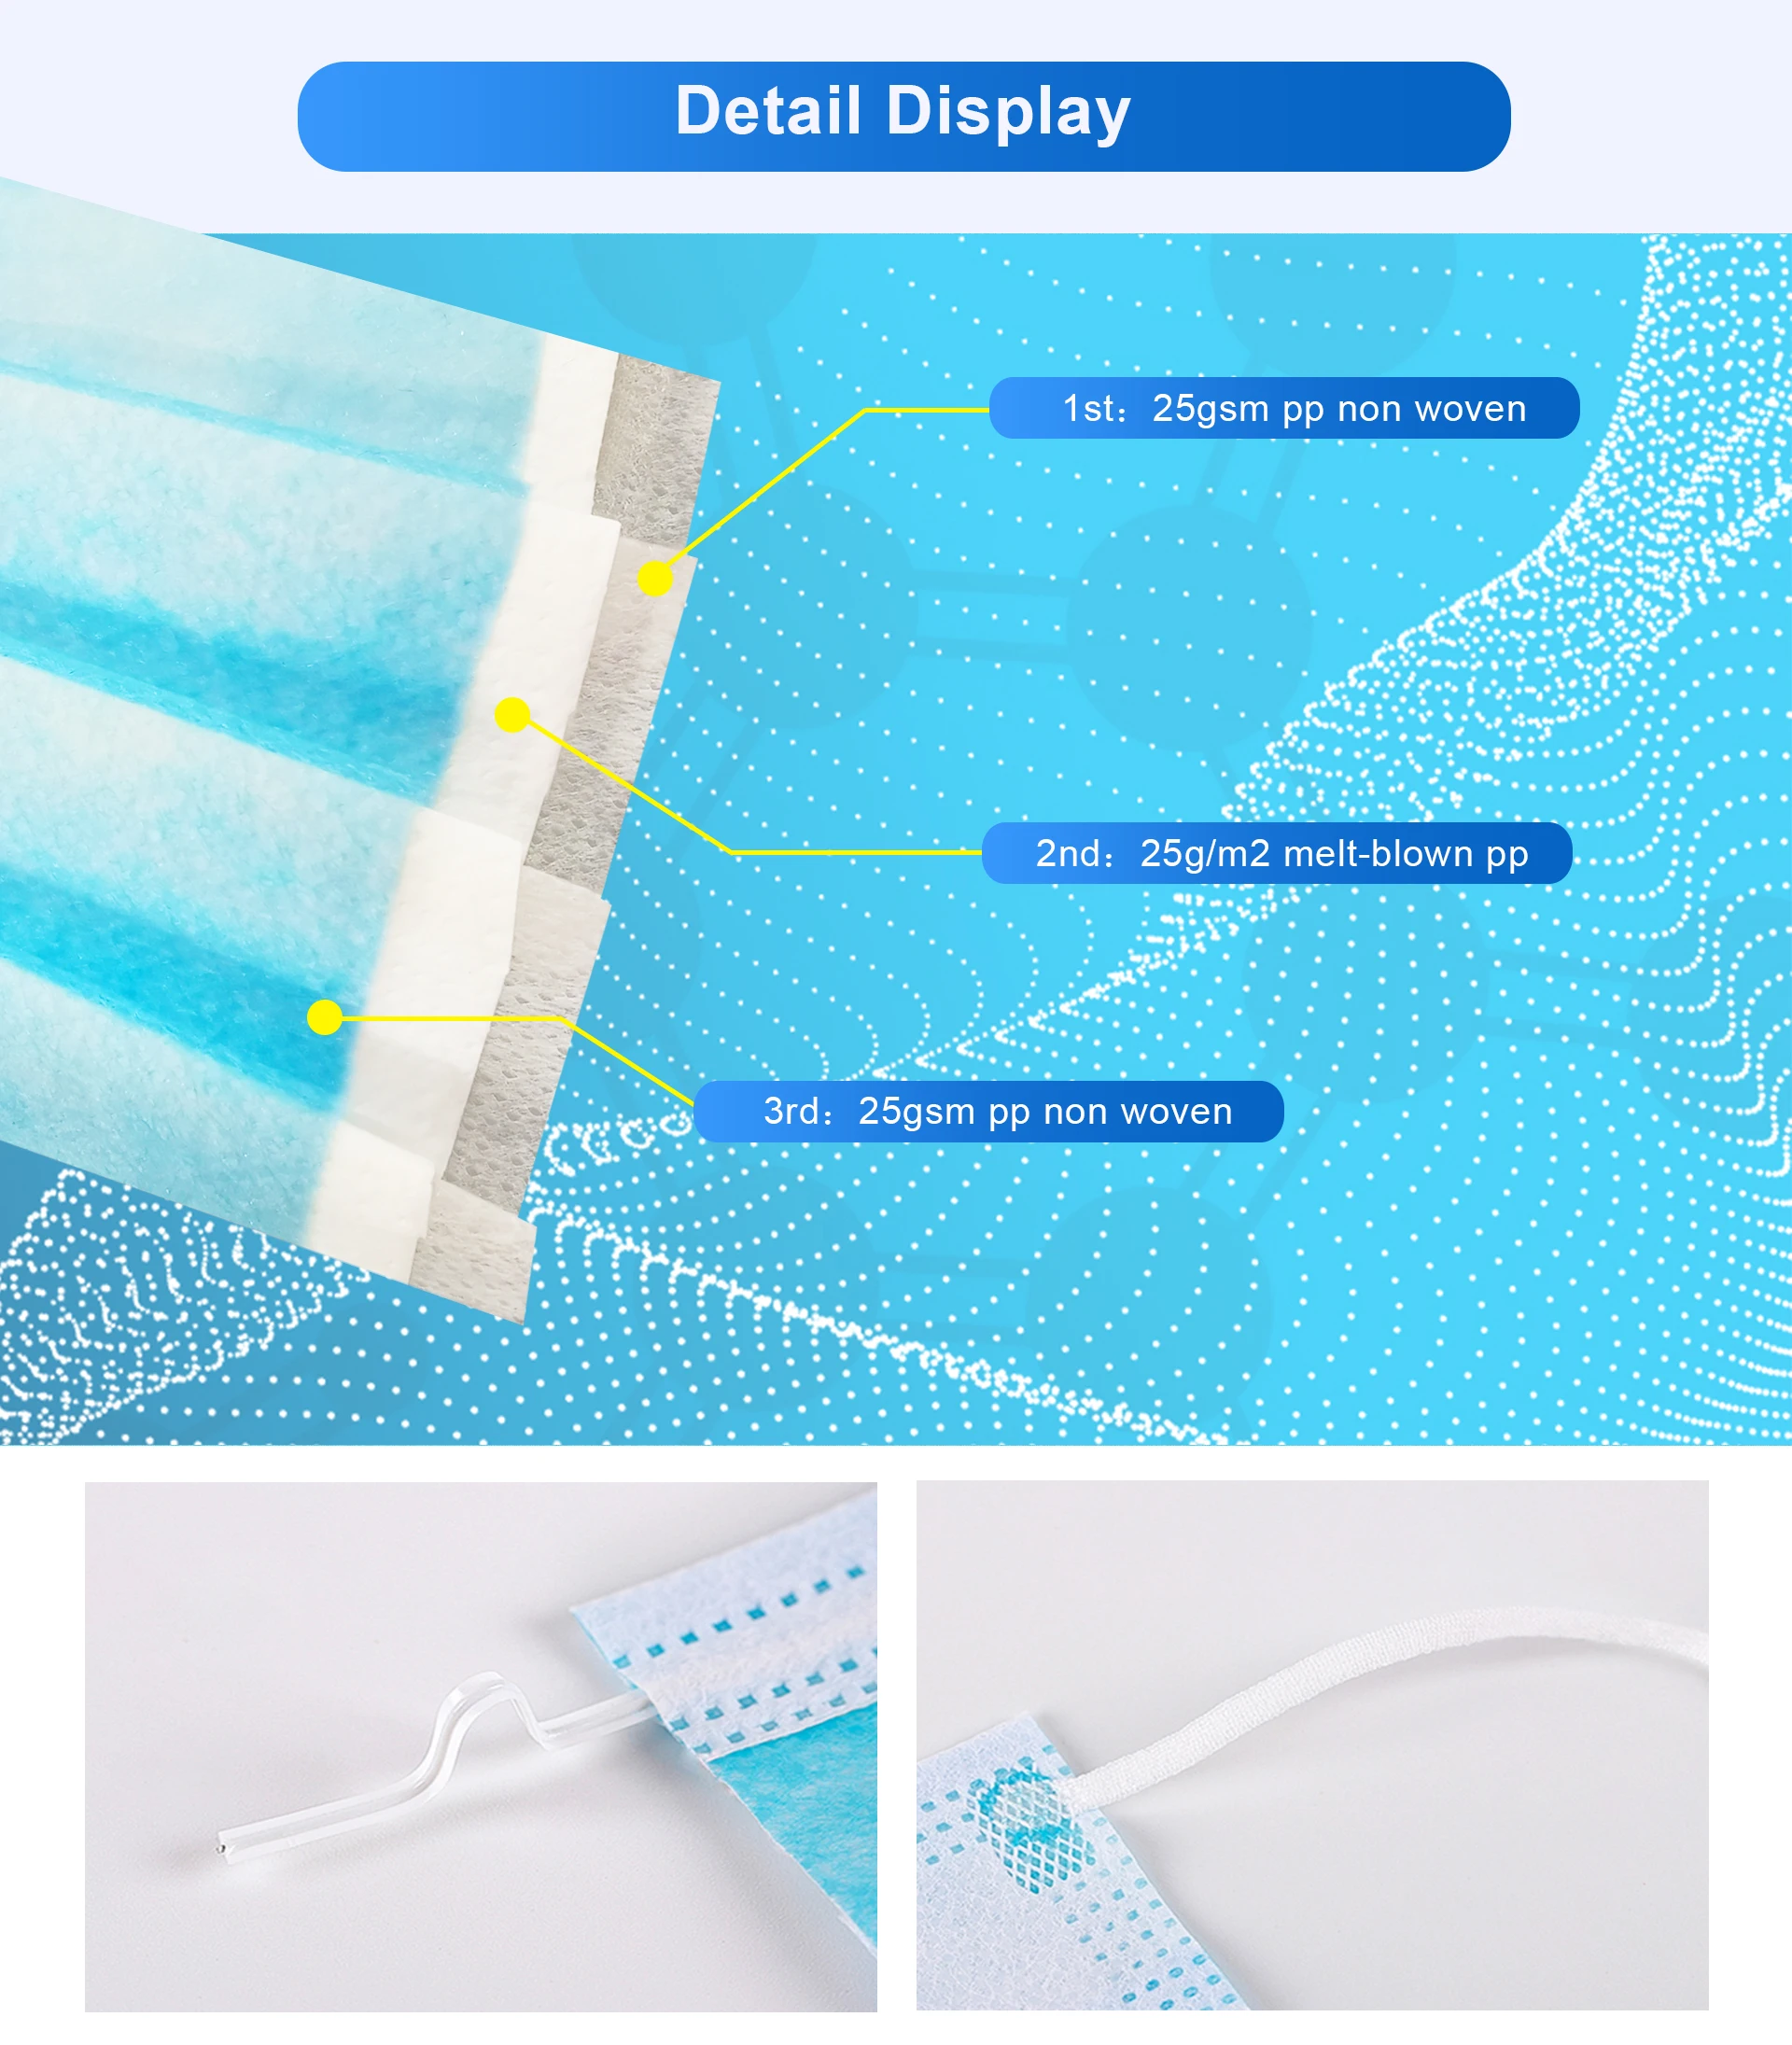 
China Supplier Ready In Stock 3 ply Earloop Nonwoven 3PLY Disposable Face Mask with plastic nose bridge 